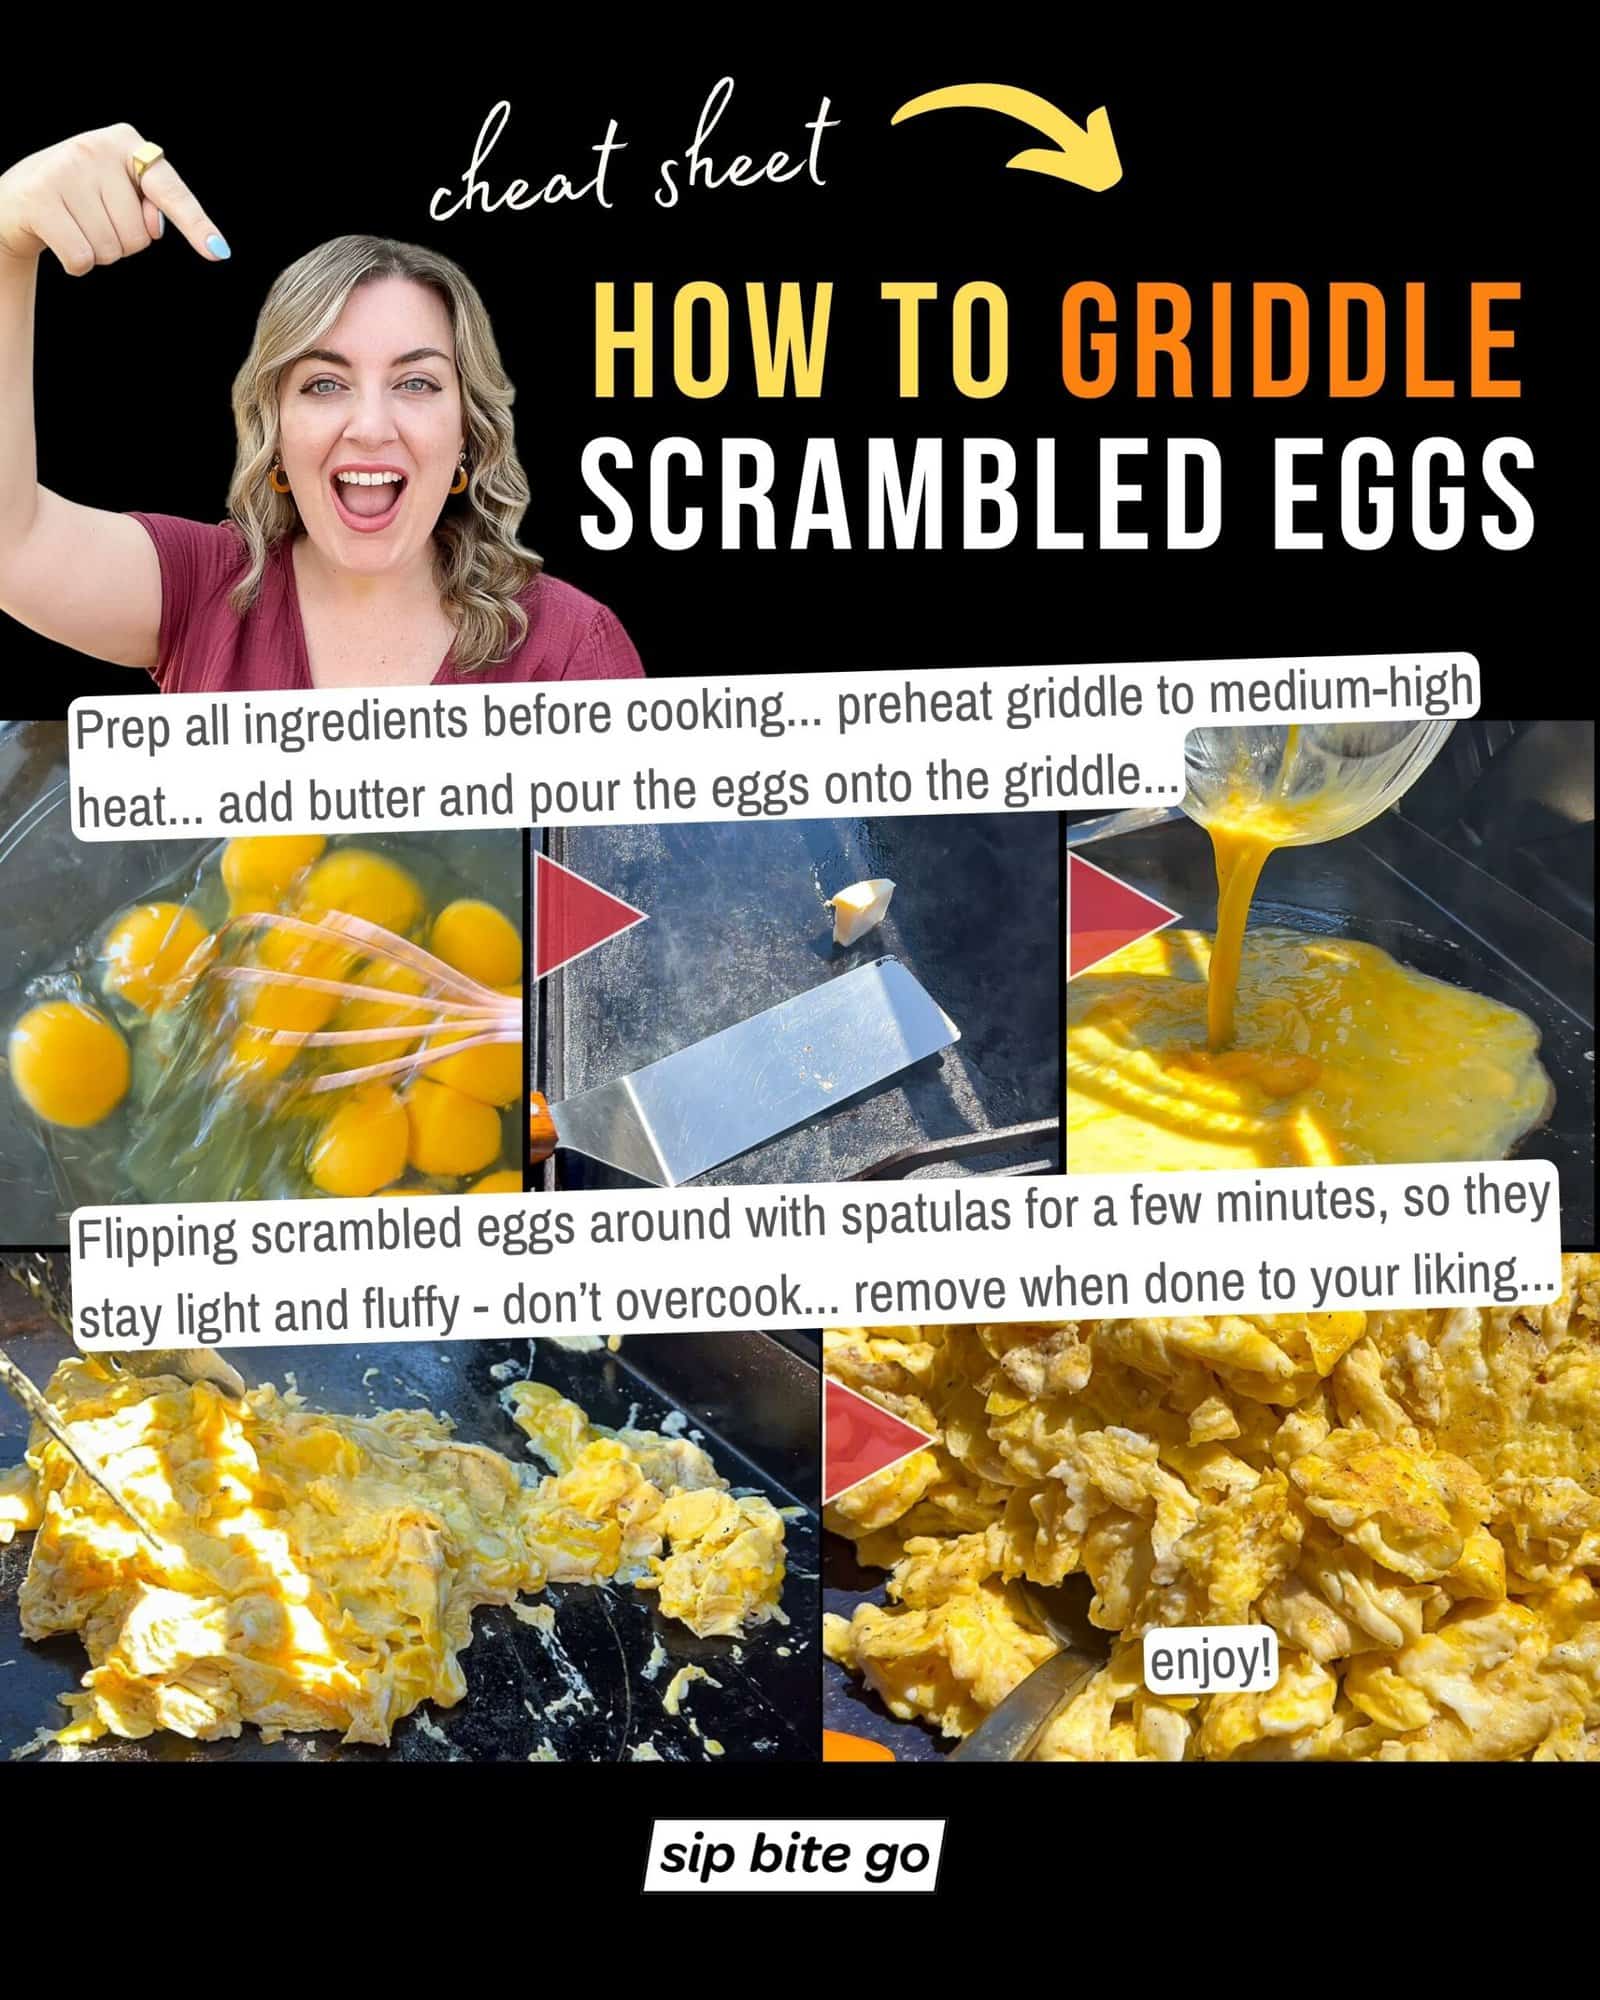 Infographic depicting How To Cook Scrambled Eggs on Griddles step by step with captions and Sip Bite Go logo